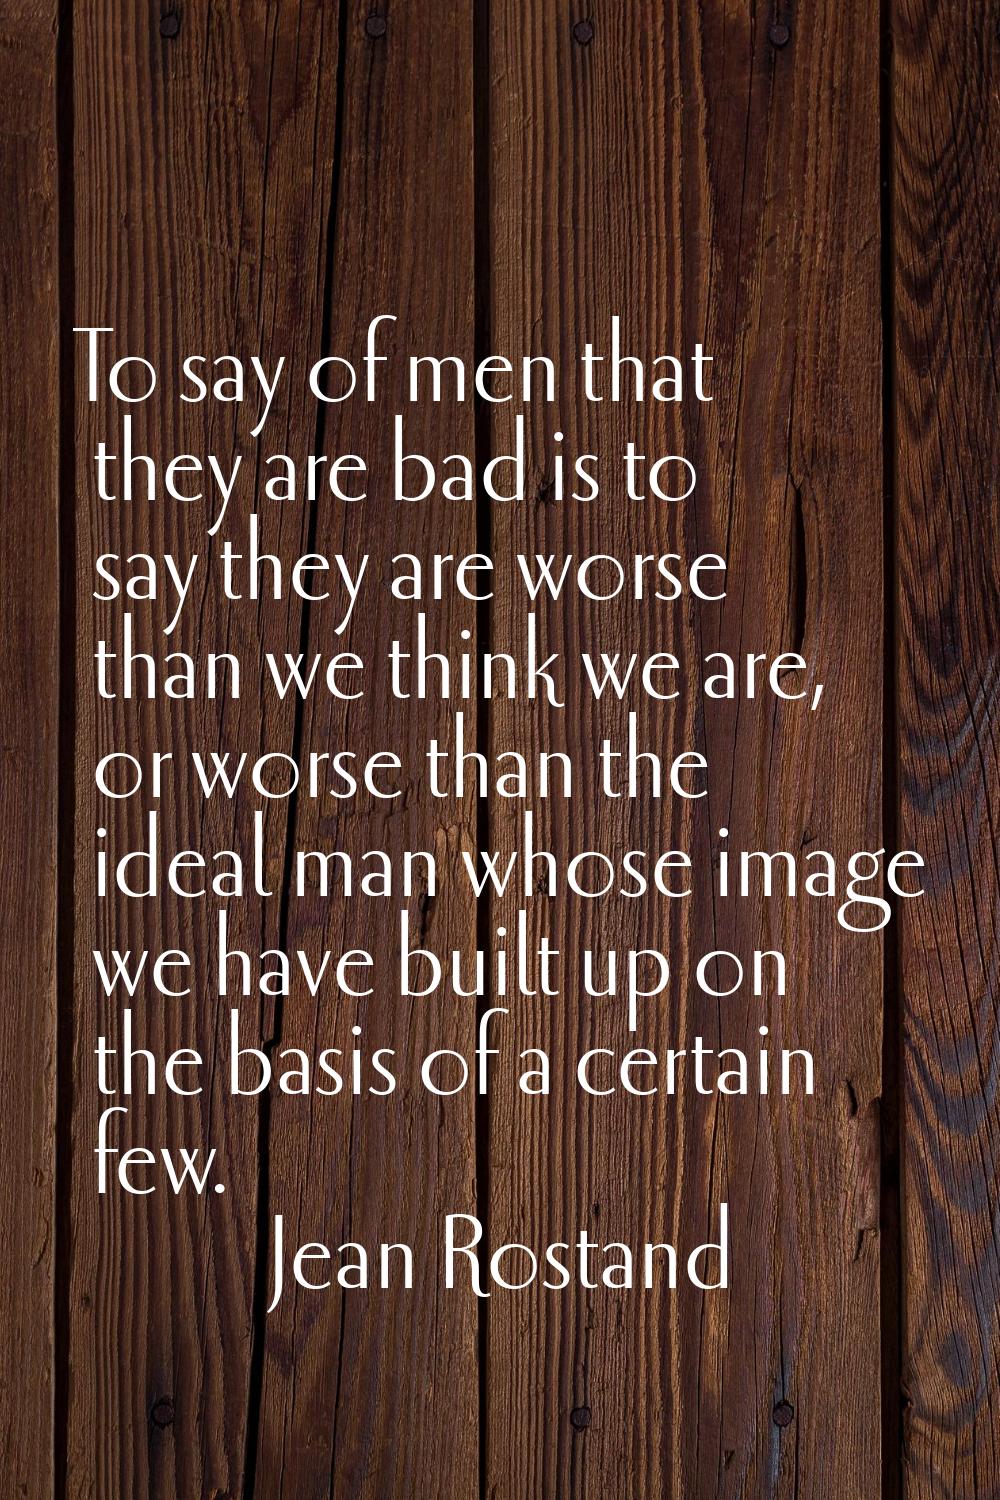 To say of men that they are bad is to say they are worse than we think we are, or worse than the id